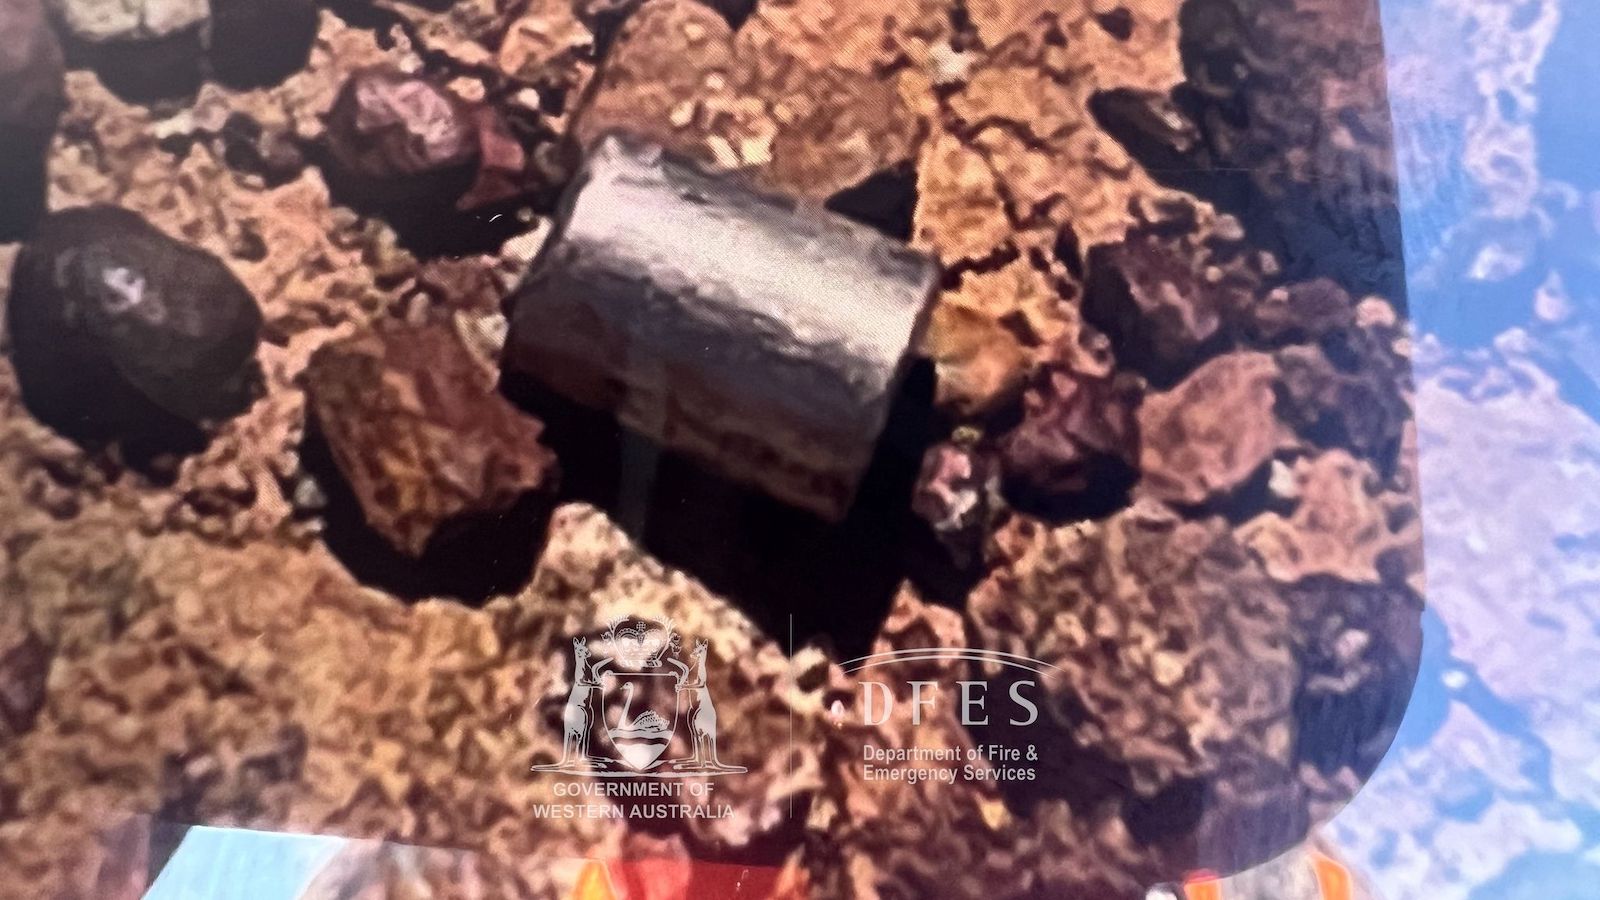 Radioactive capsule found in Western Australia after frantic search thumbnail